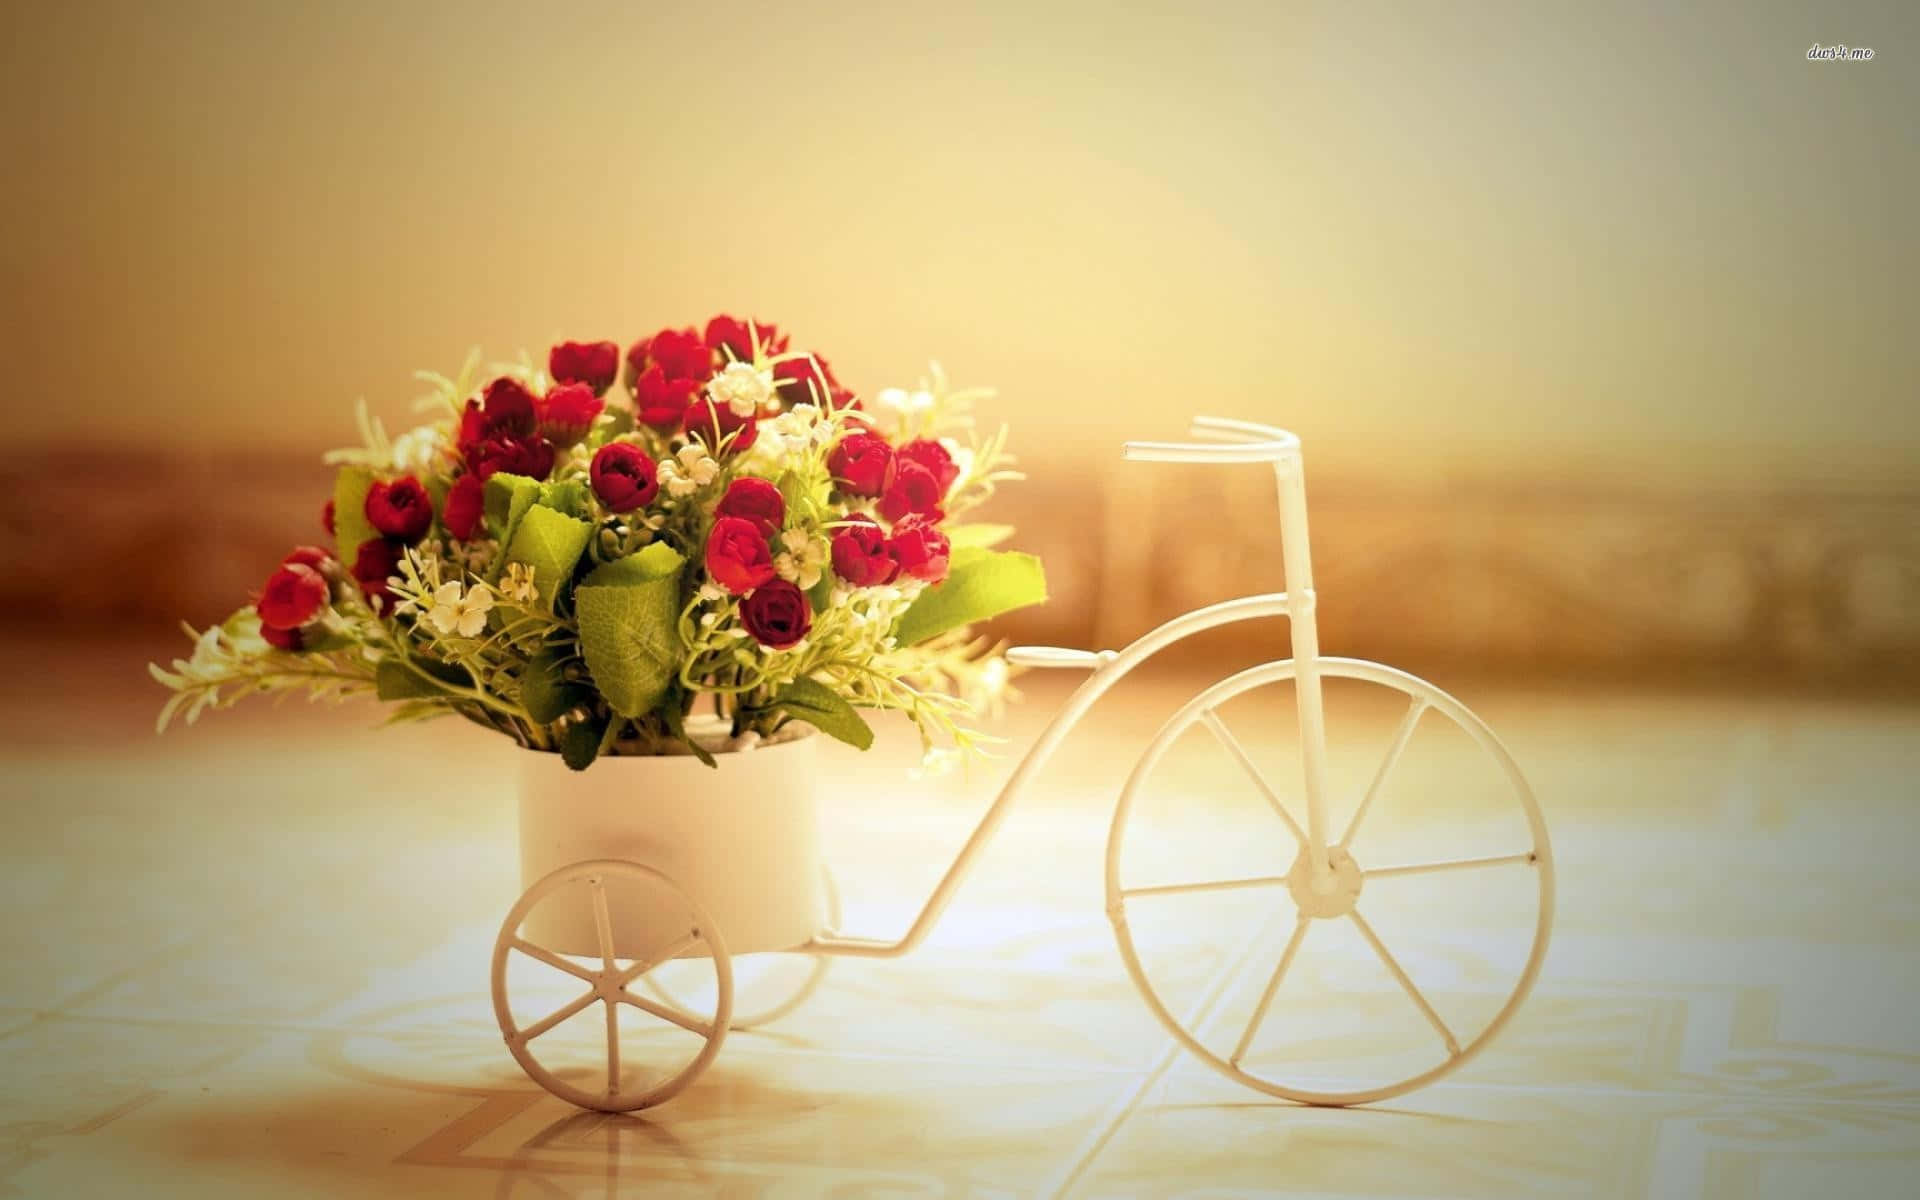 A White Bicycle With Red Flowers